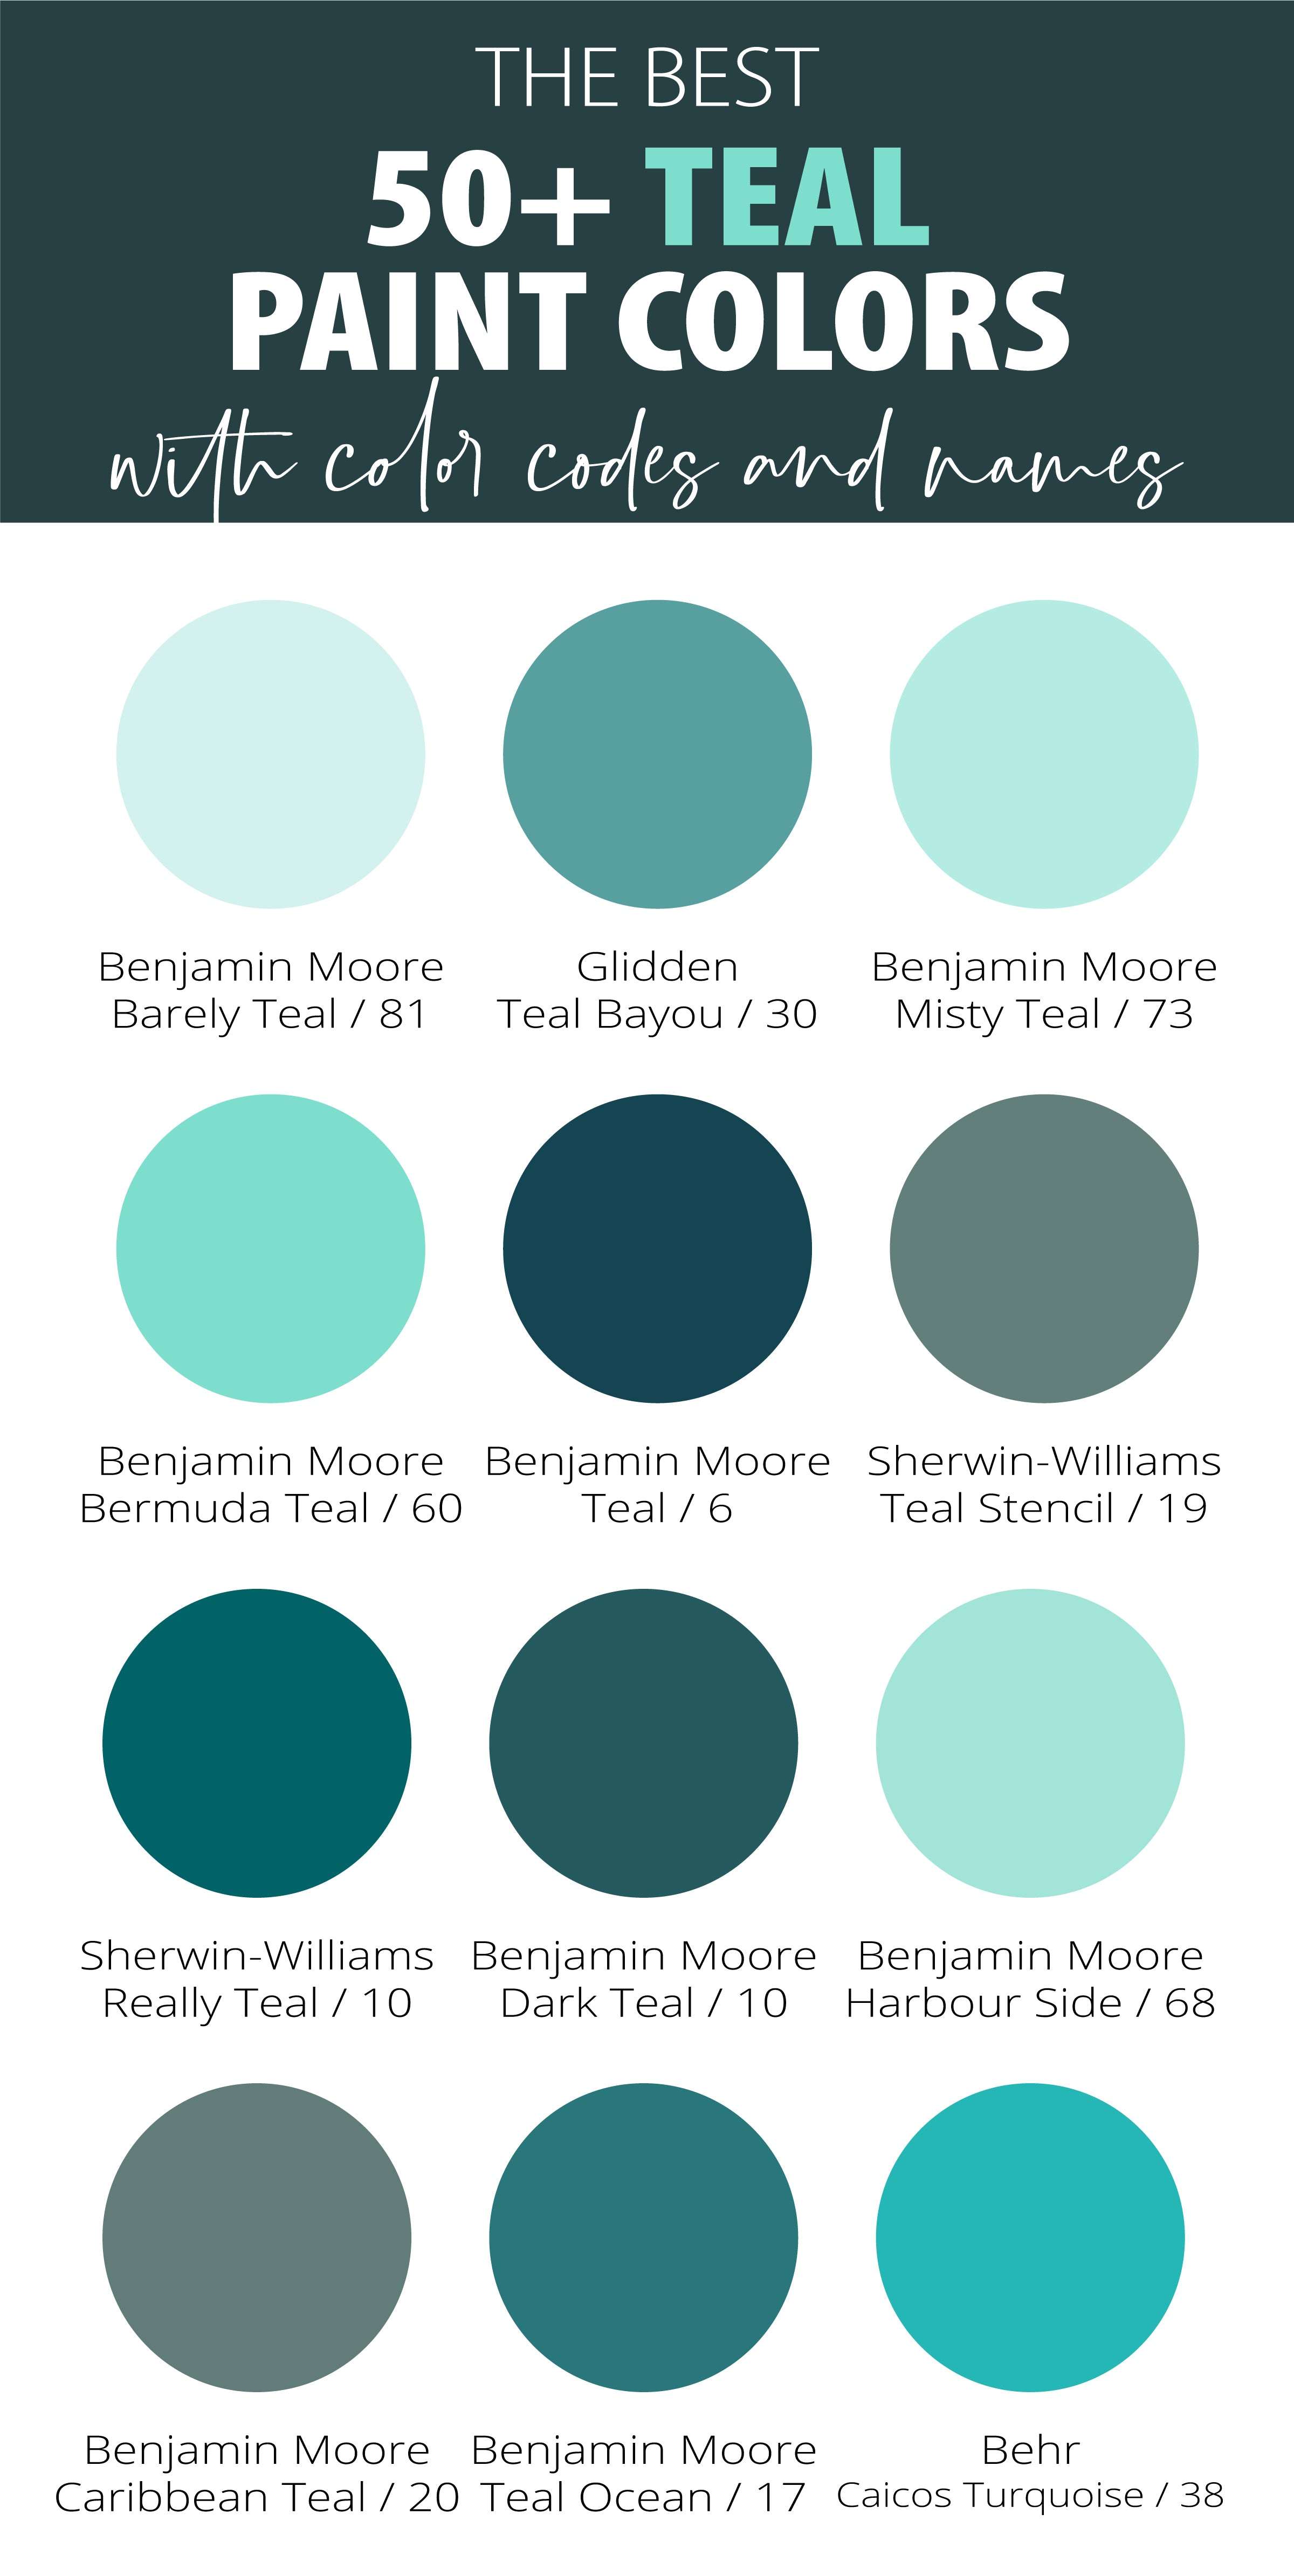 https://cdn.shopify.com/s/files/1/1038/1798/files/Best-Teal-Paint-Colors-with-Names-Colors-and-LRV-values-pinterest-tall.jpg?v=1694518591